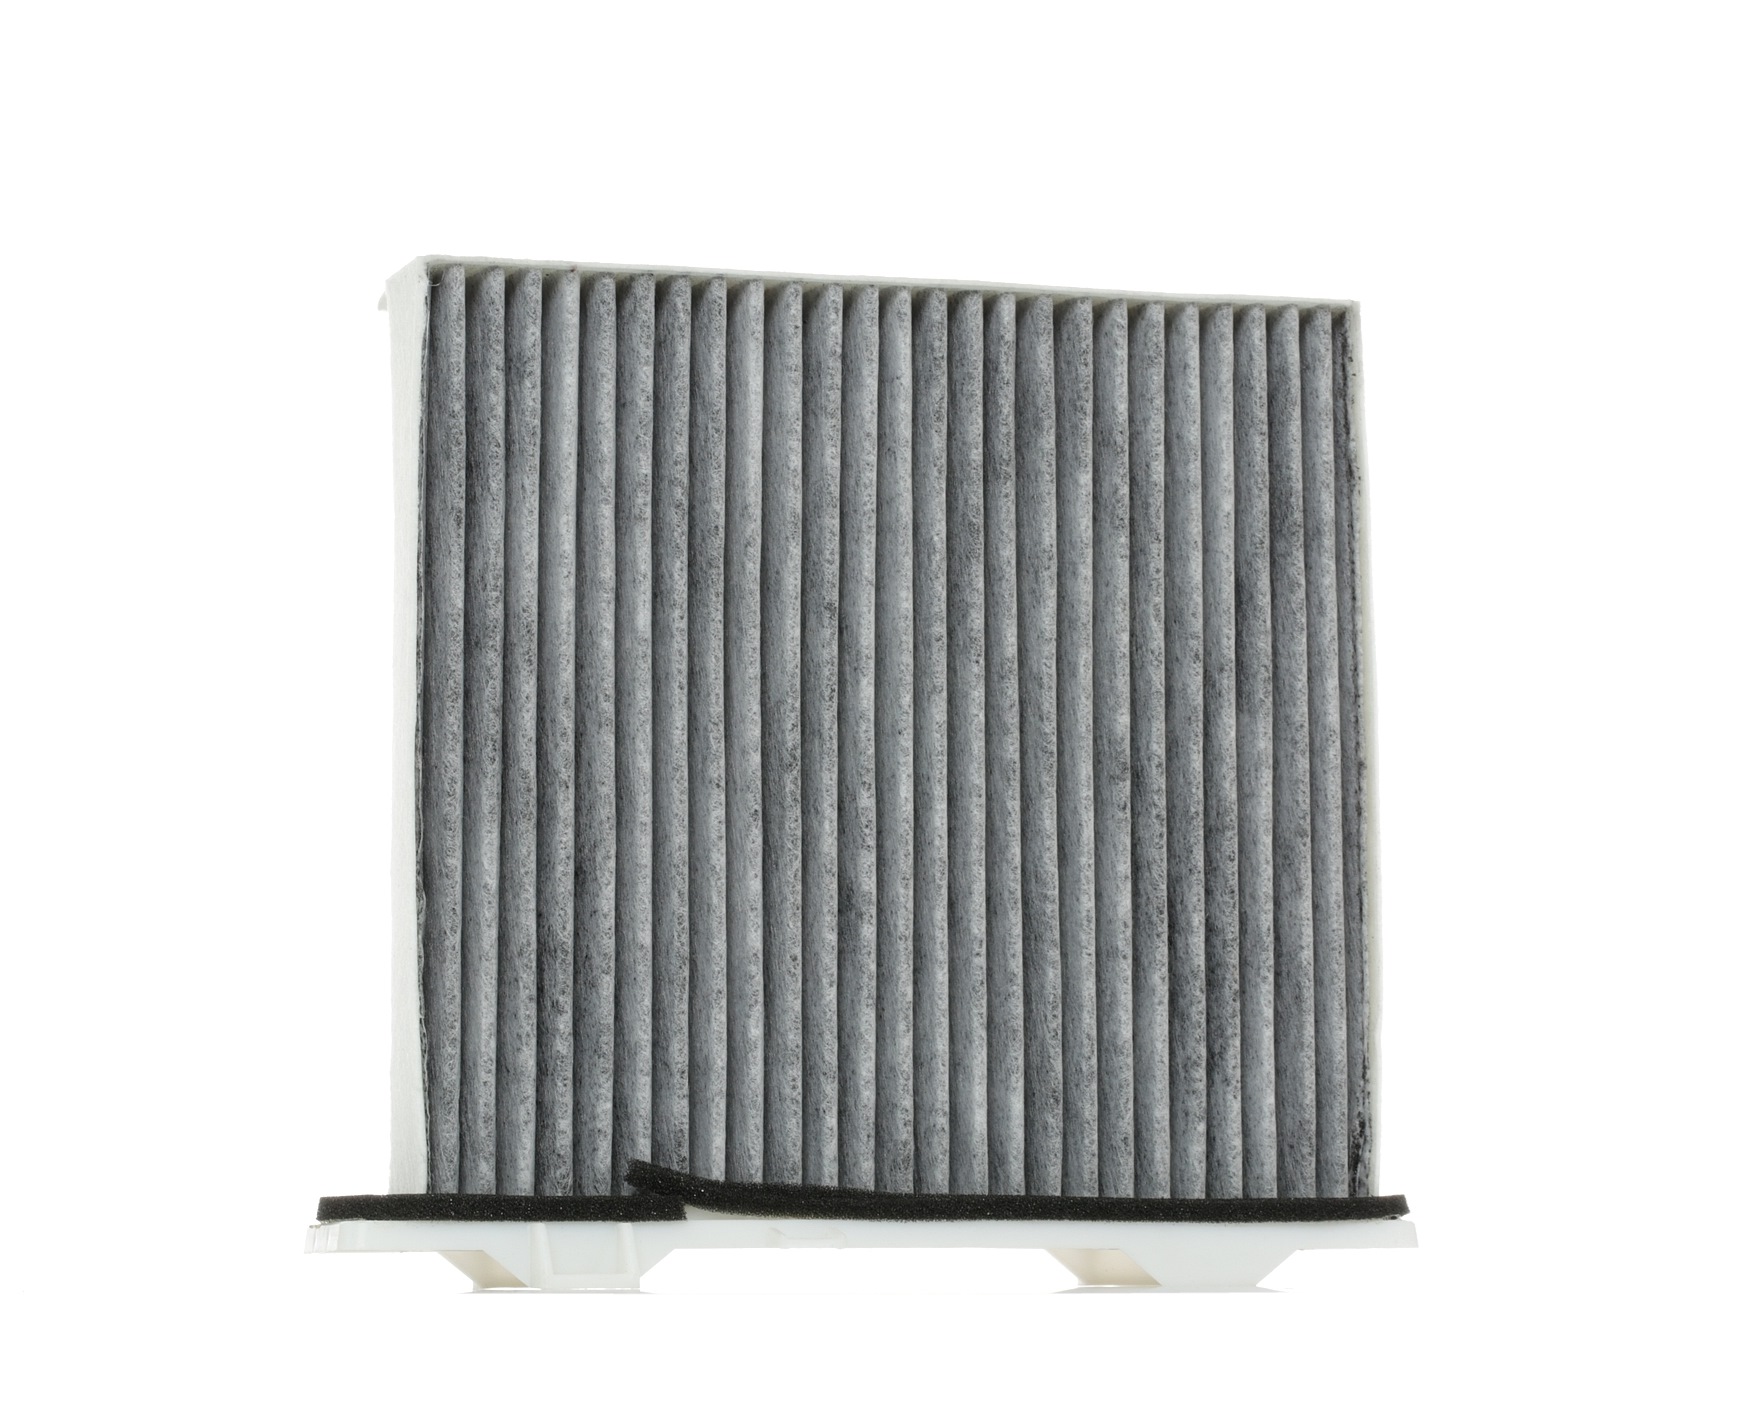 STARK Activated Carbon Filter, 215 mm x 241 mm x 67 mm Width: 241mm, Height: 67mm, Length: 215mm Cabin filter SKIF-0170109 buy